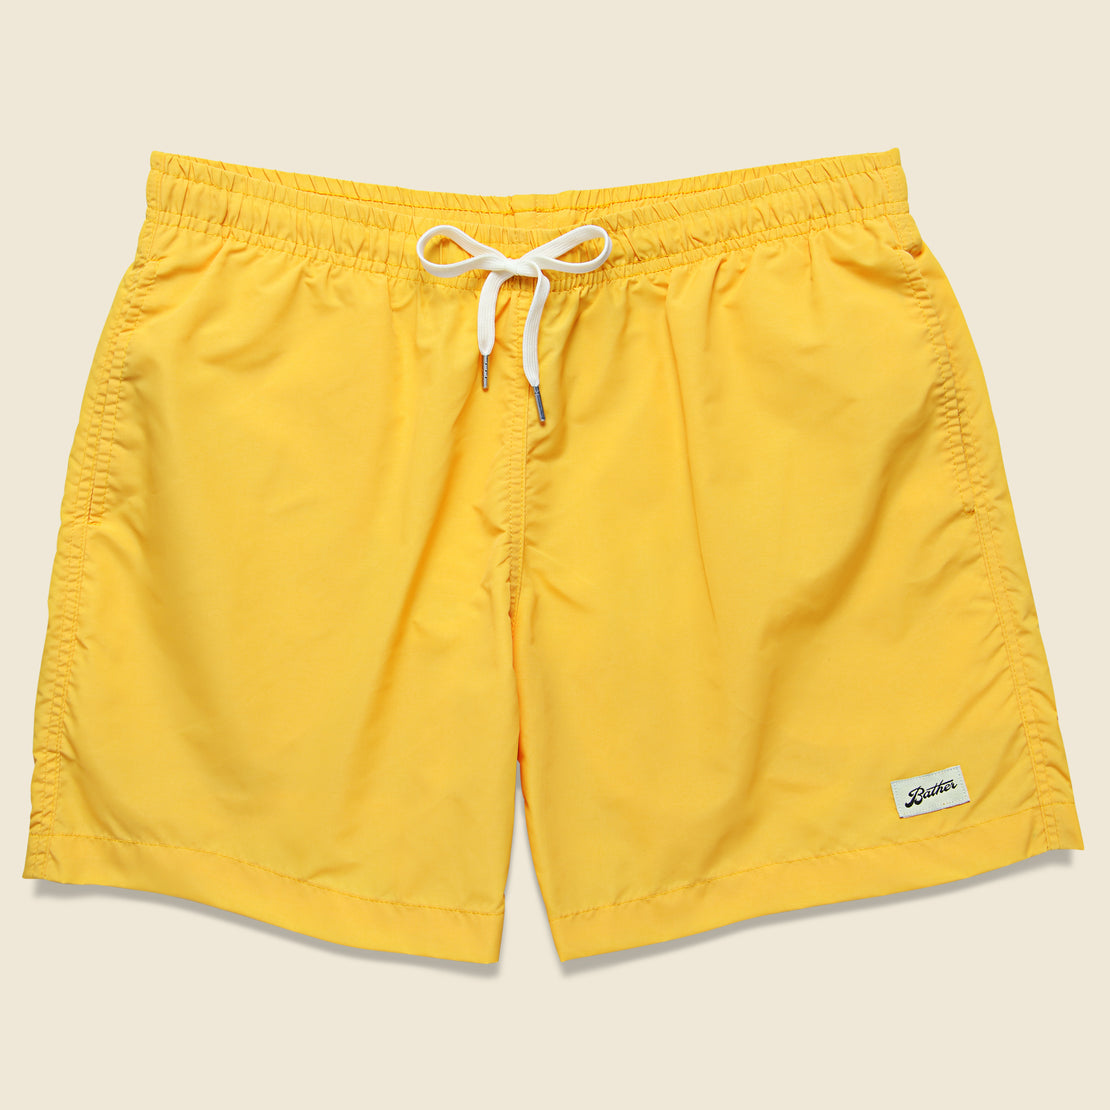 Bather Trunk Co. Bather - Solid Swim Trunk, SS19